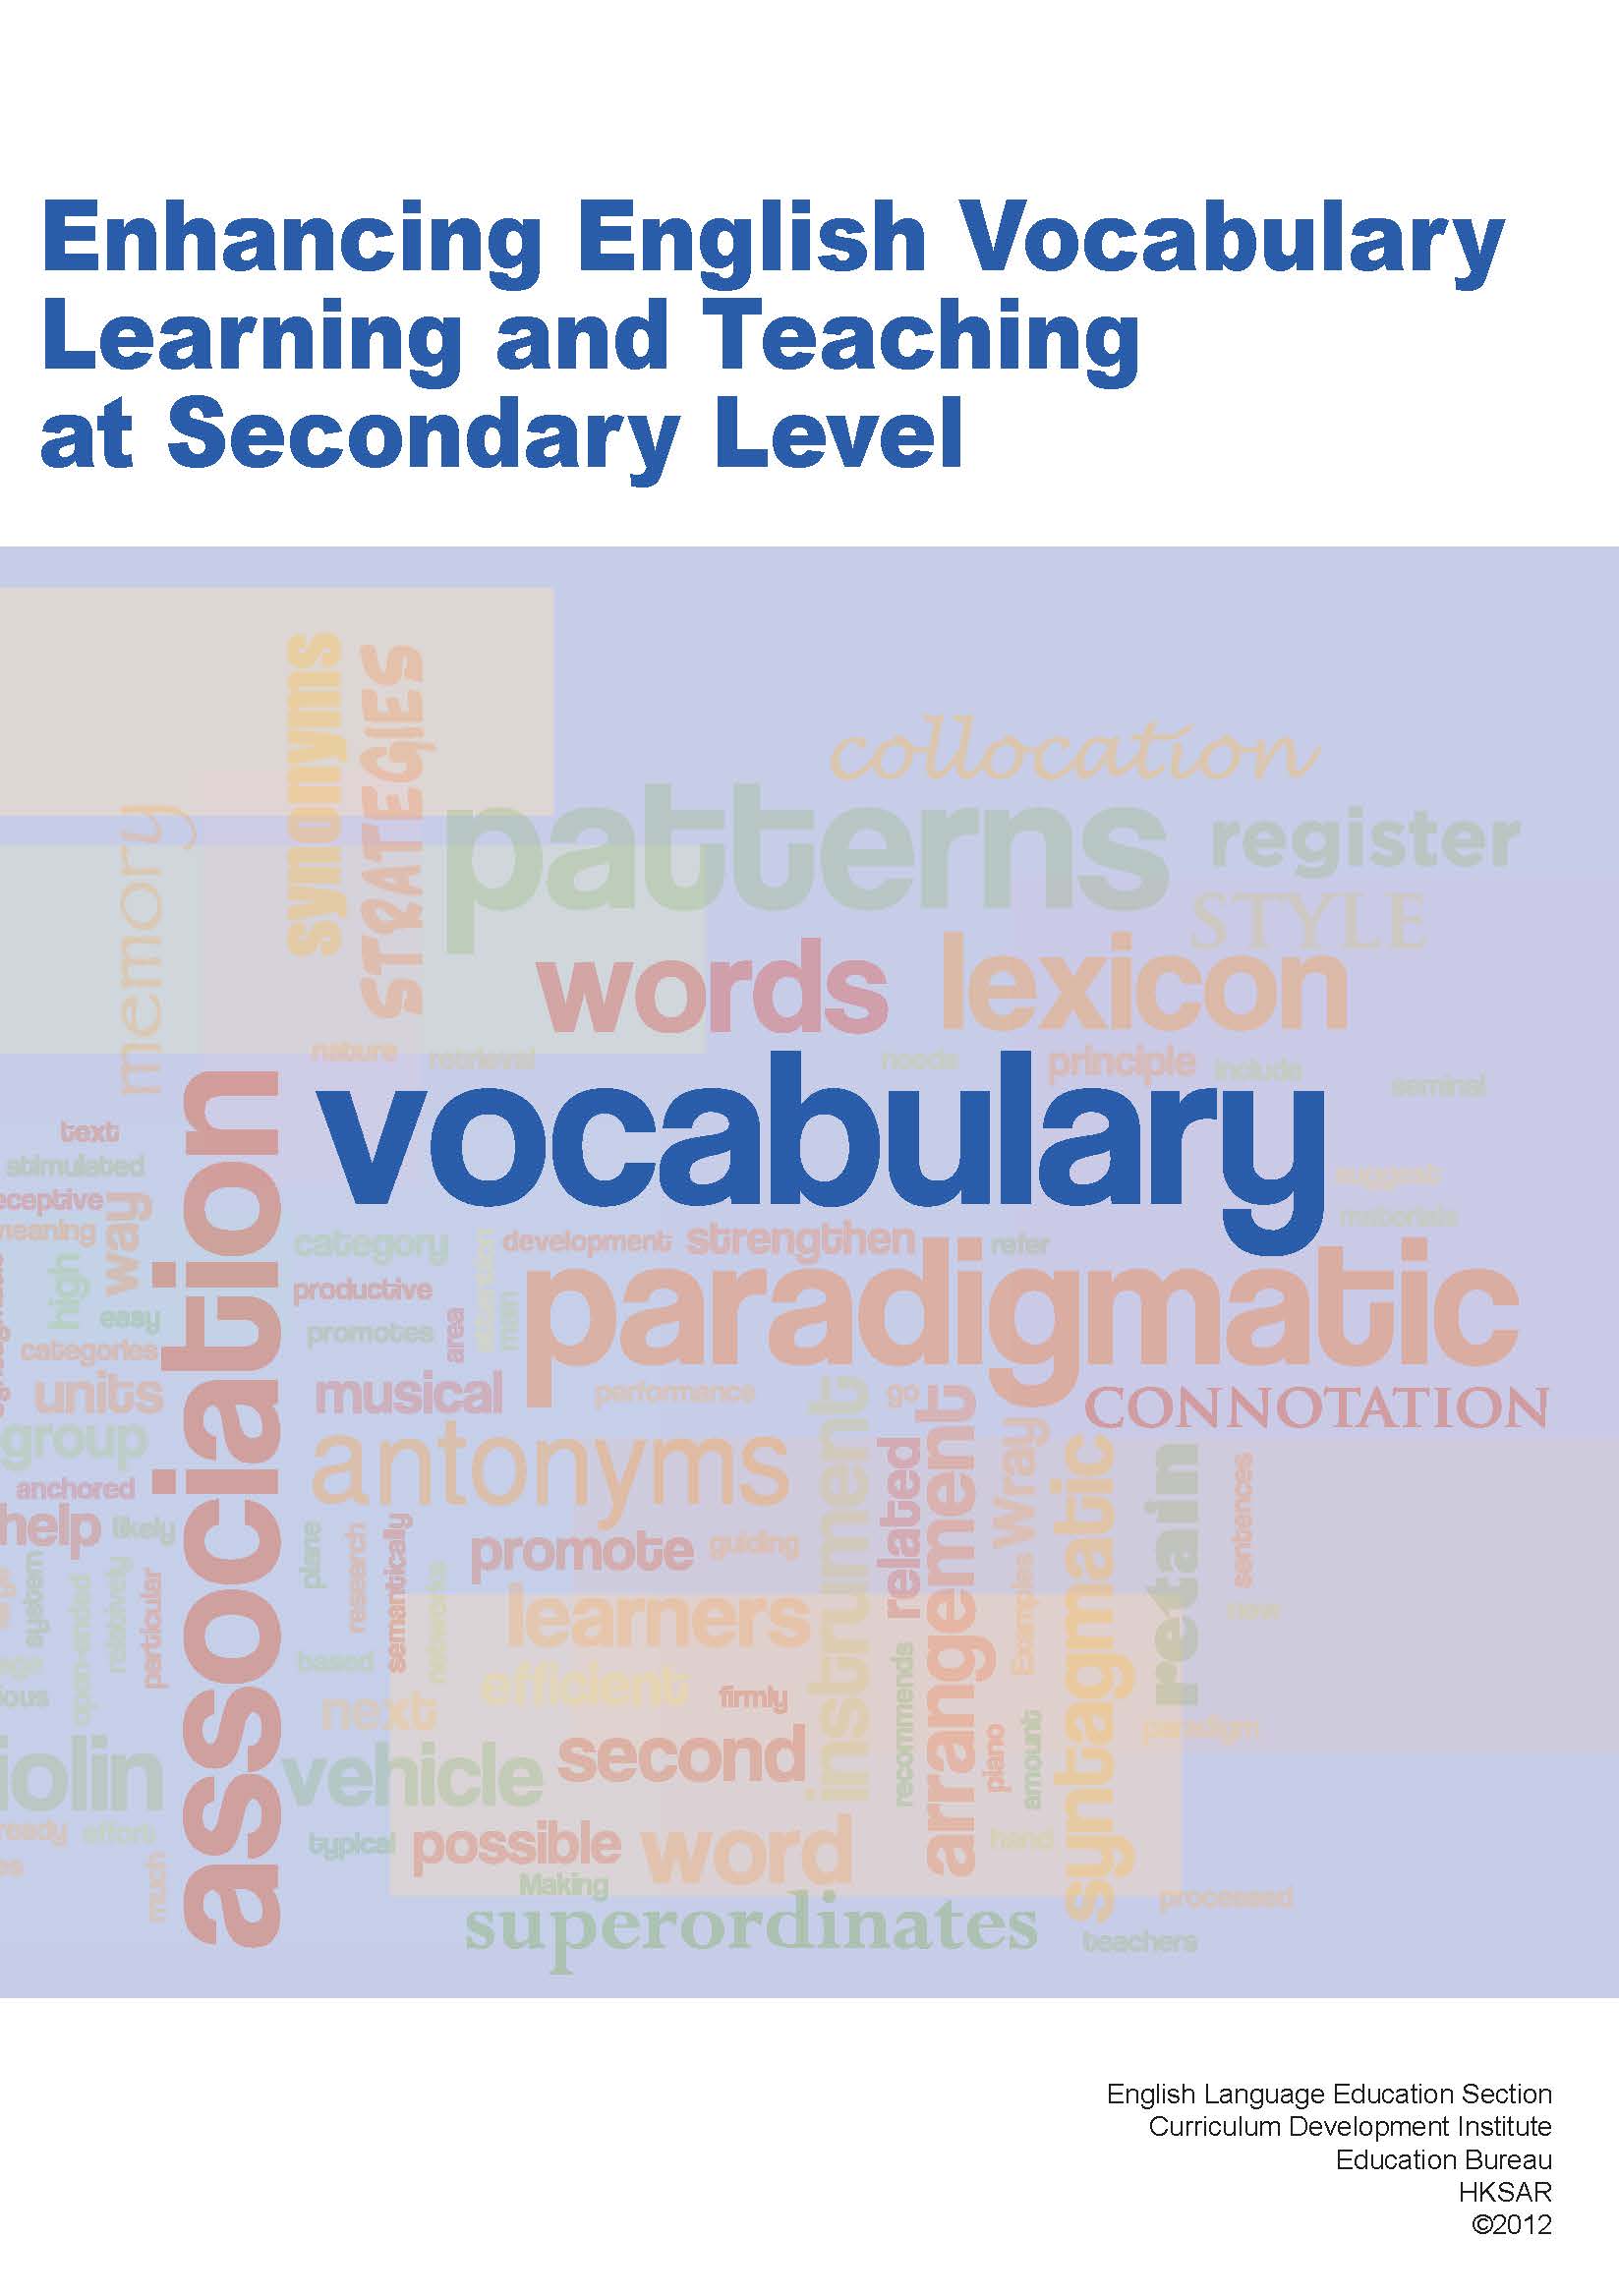 Enhancing English Vocabulary Learning and Teaching at Secondary Level